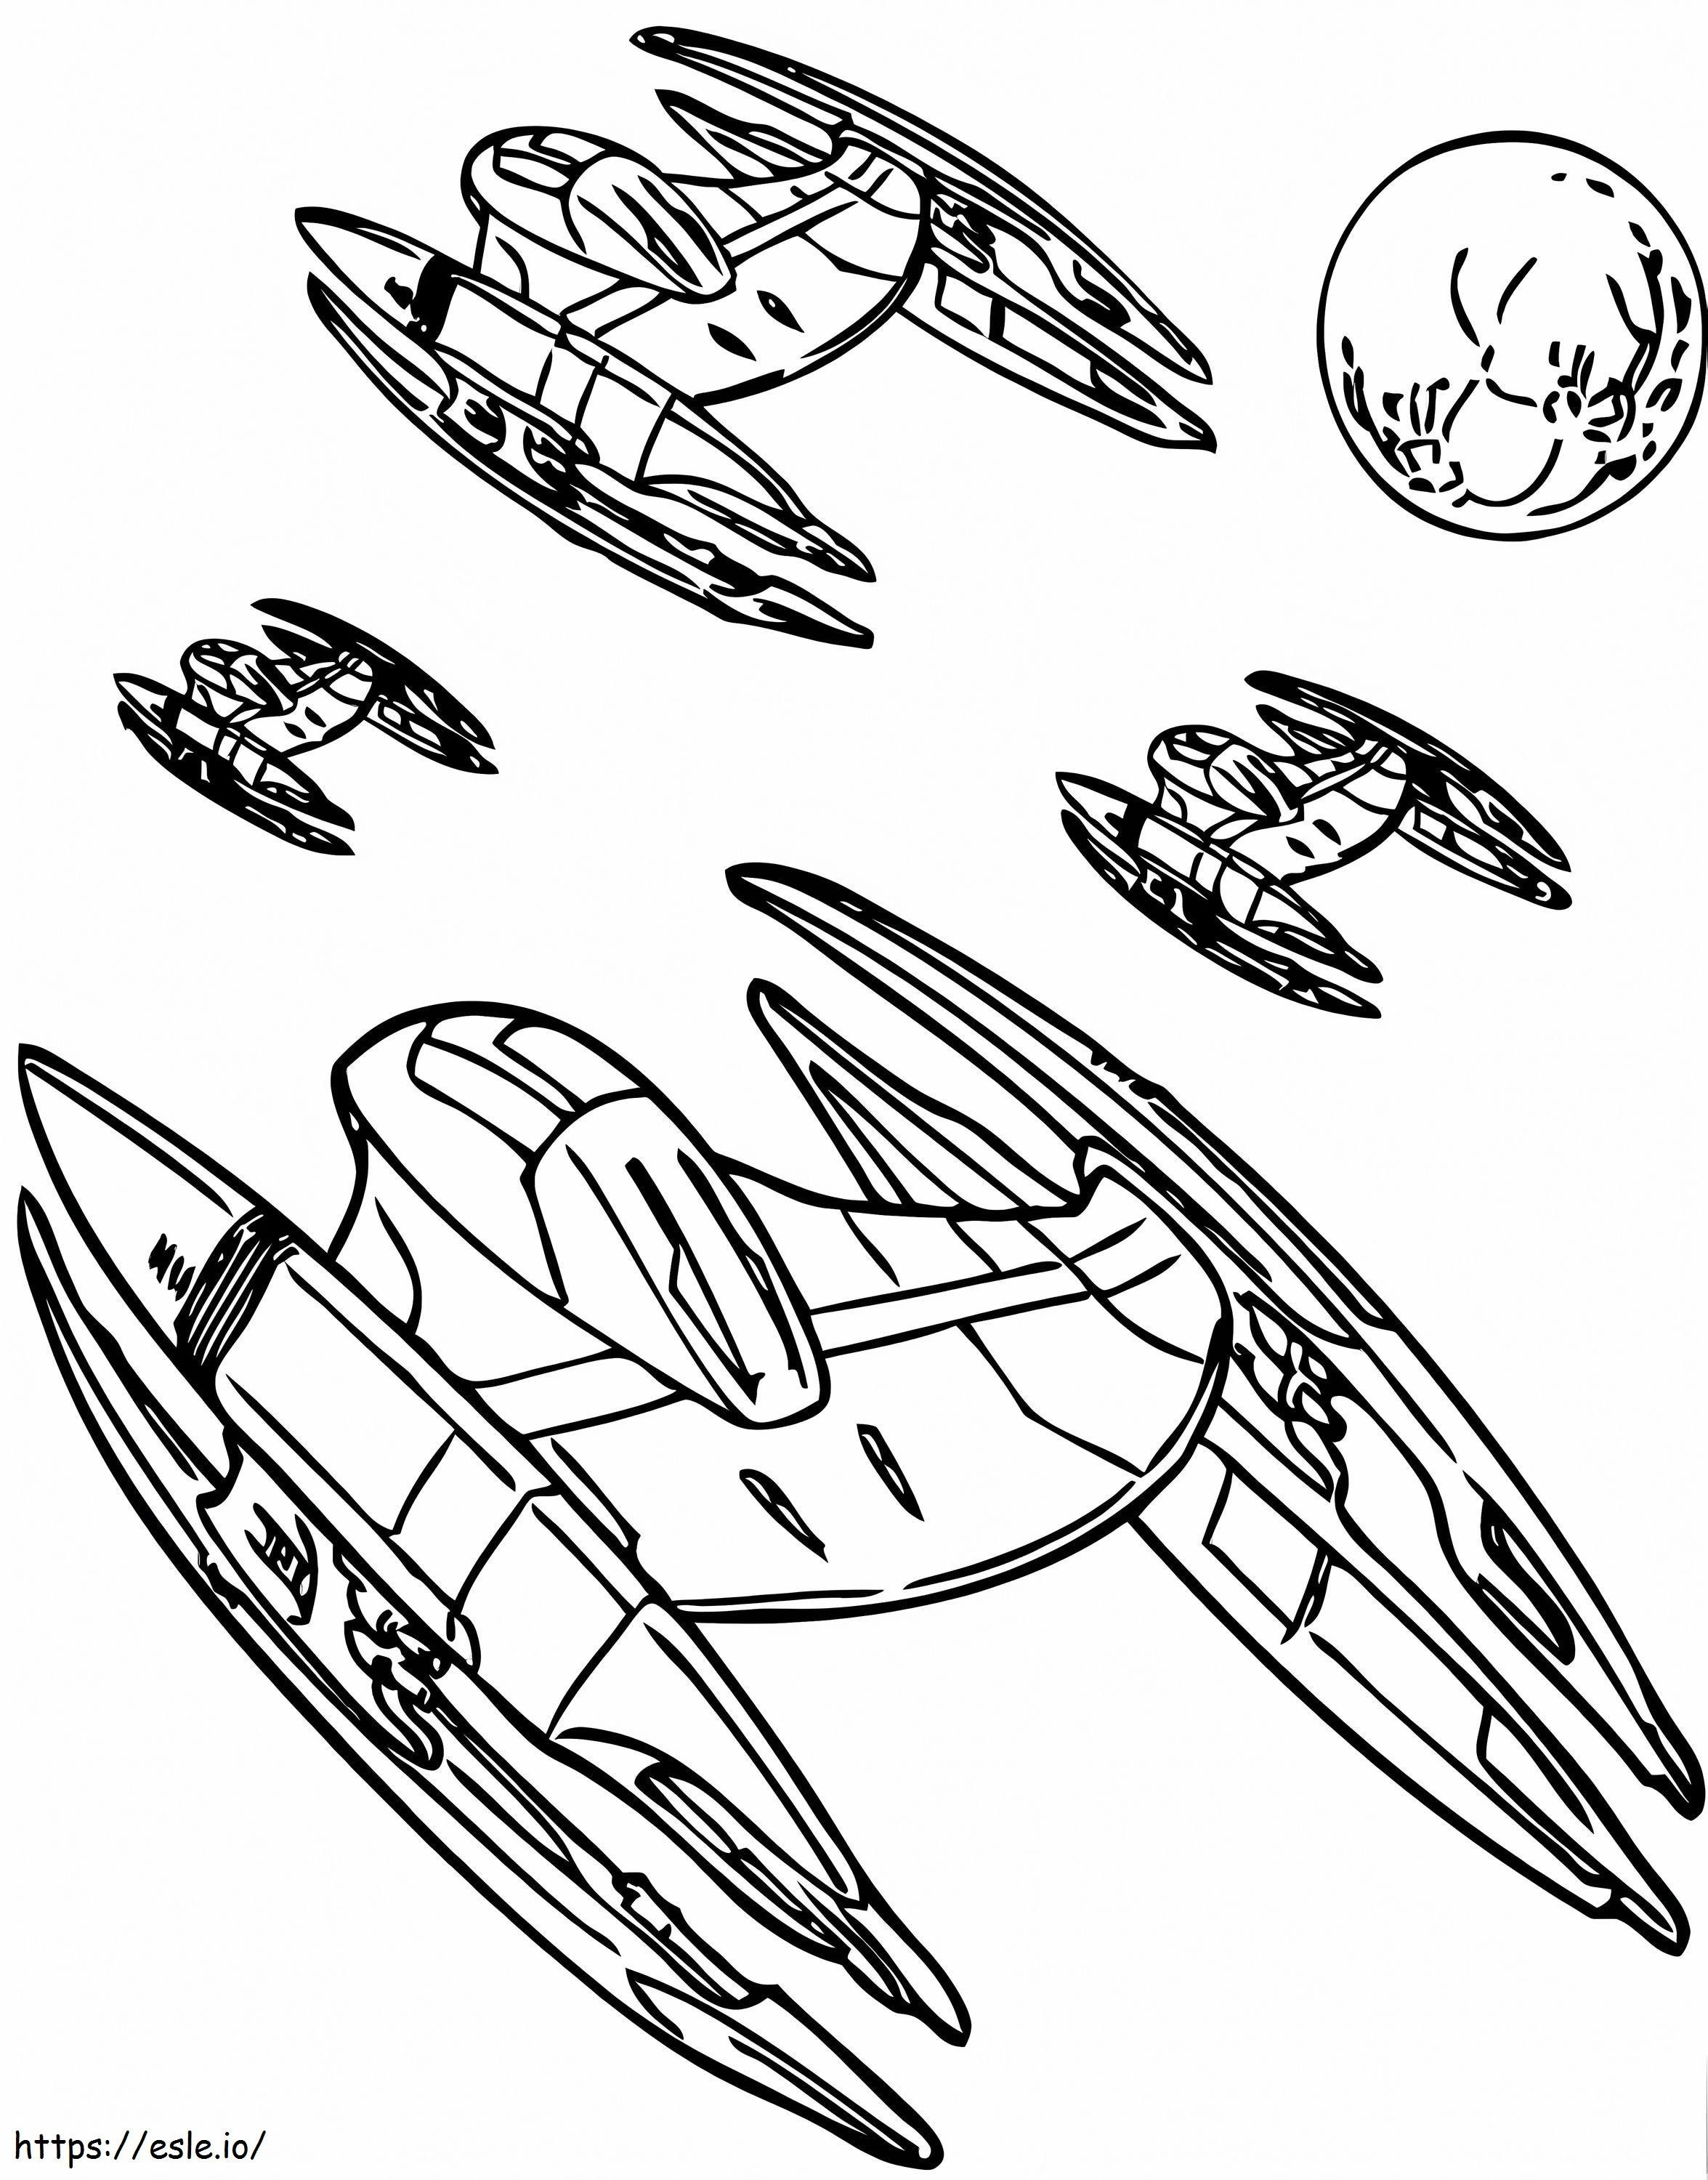 Trade Federation Spaceships A4 coloring page